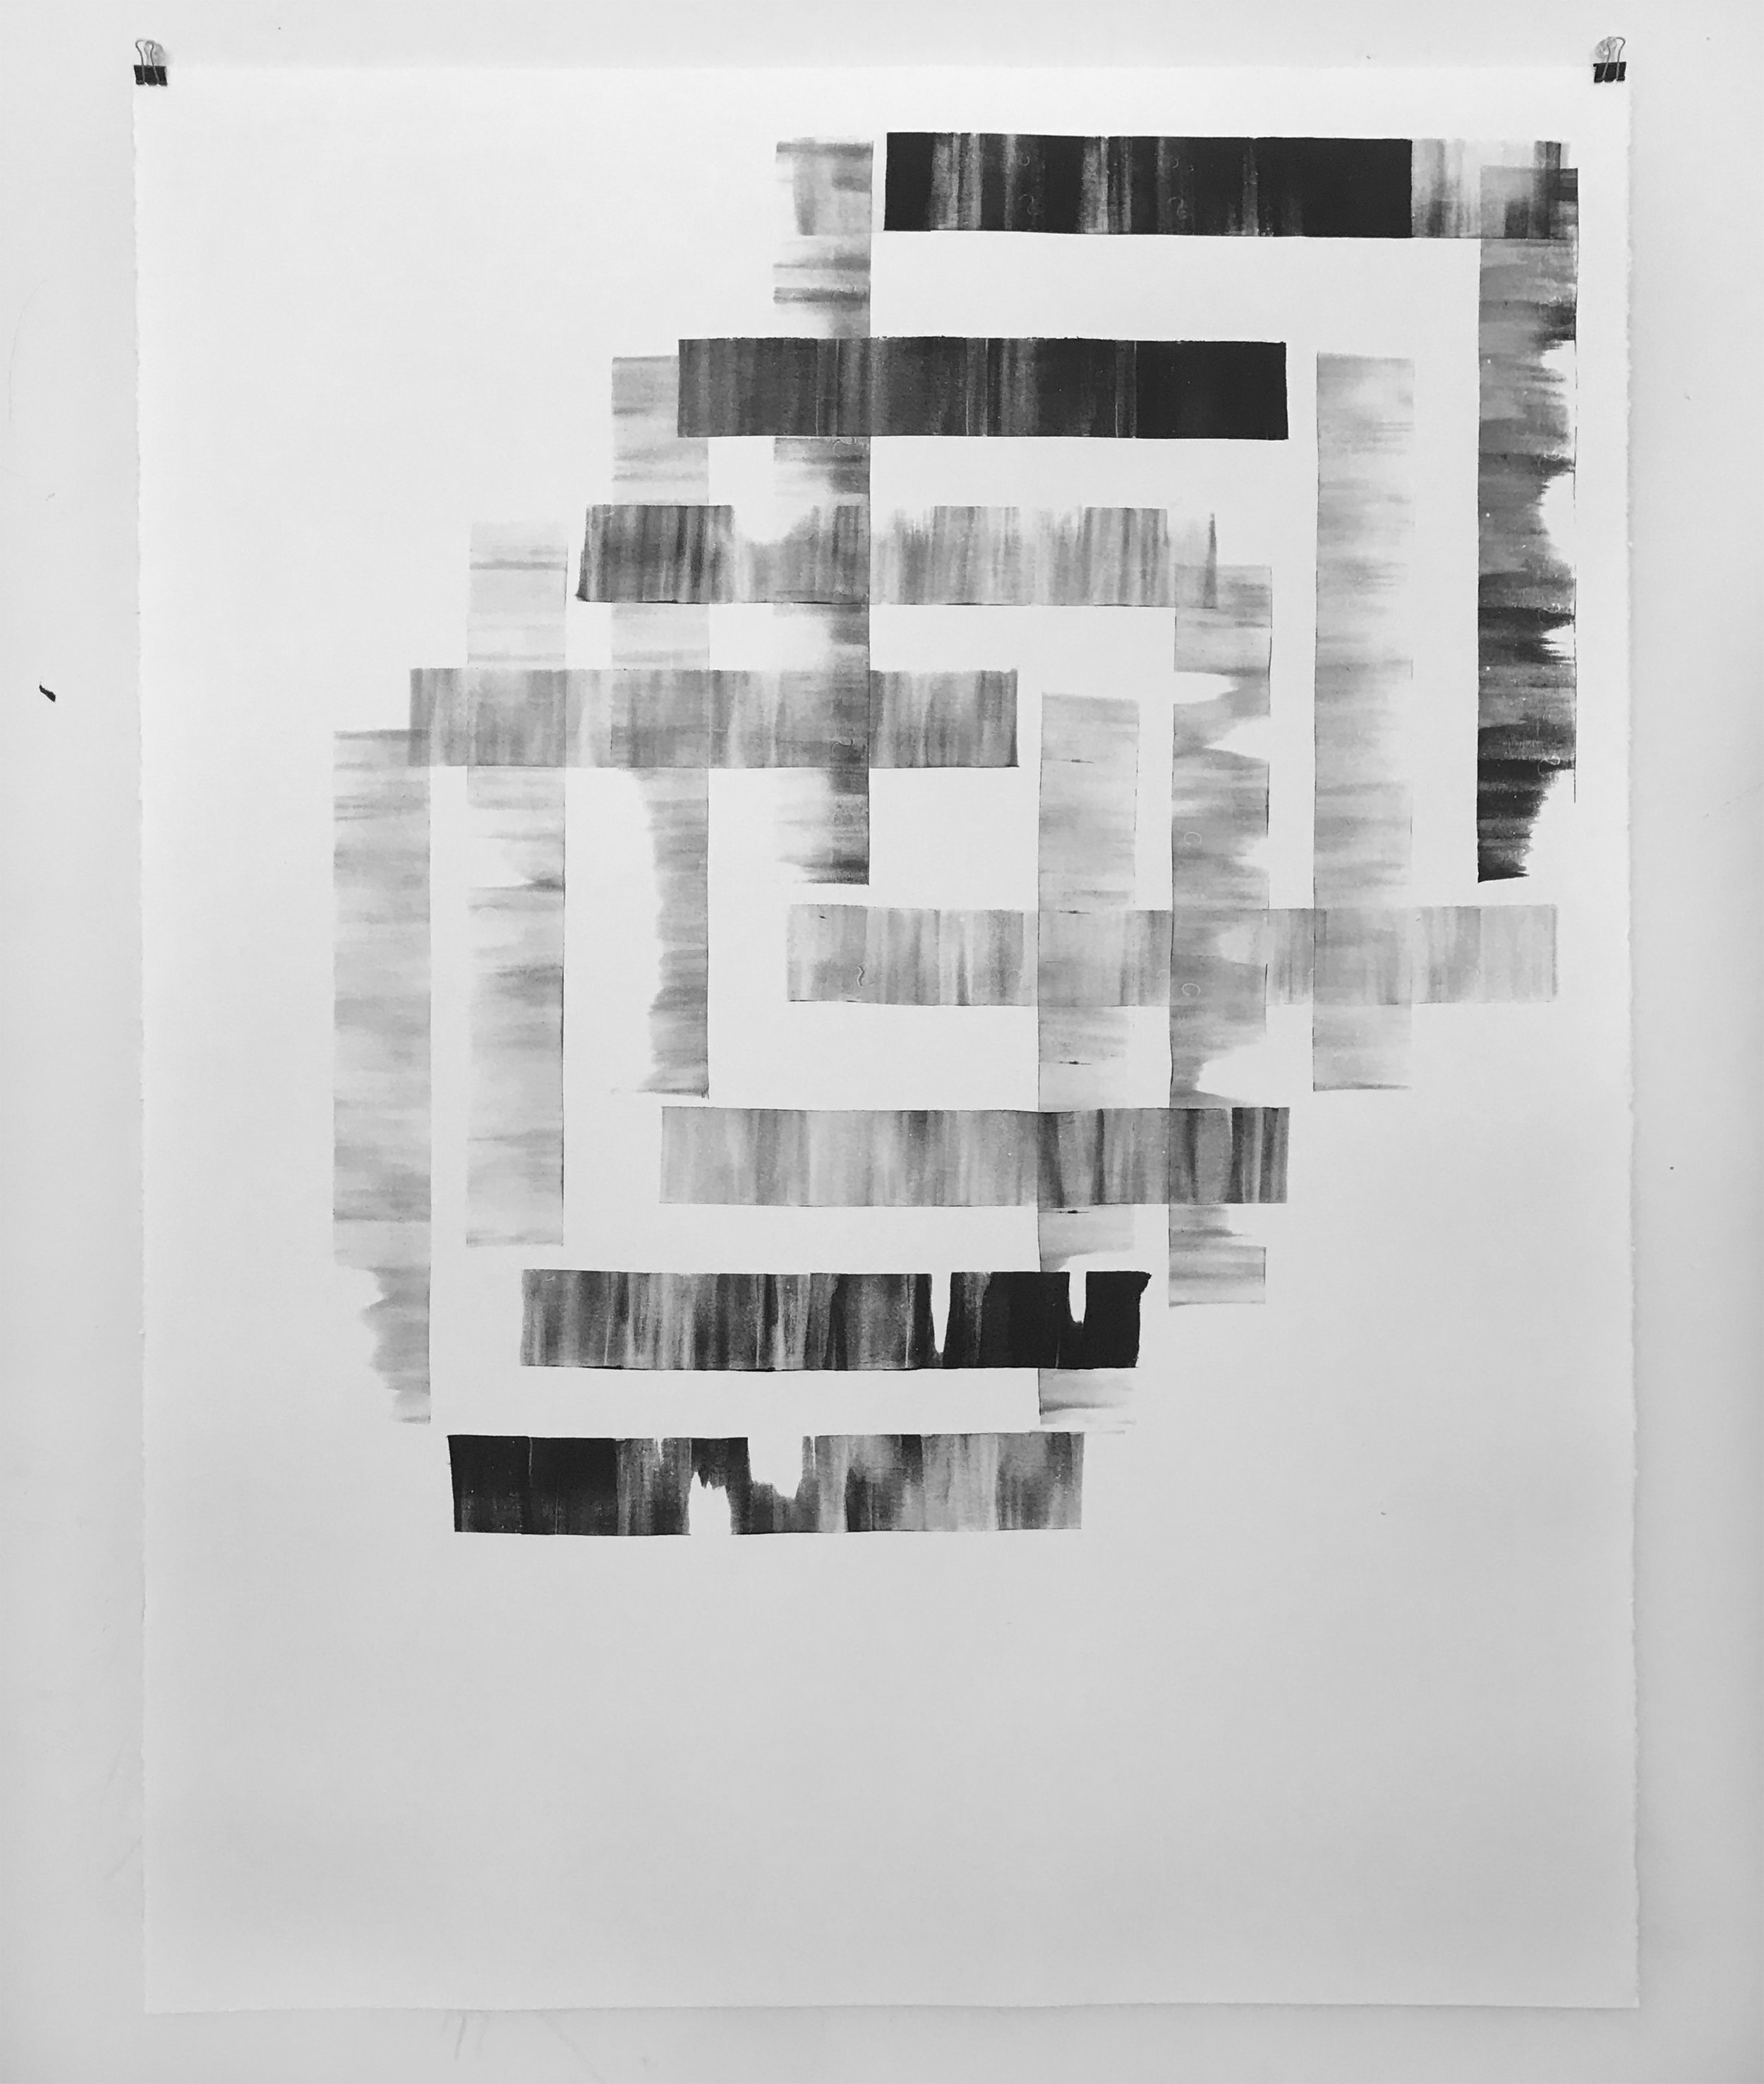  Squared Tunnel, 2019, Litho ink on paper, 50 x 38 inches (unframed) 